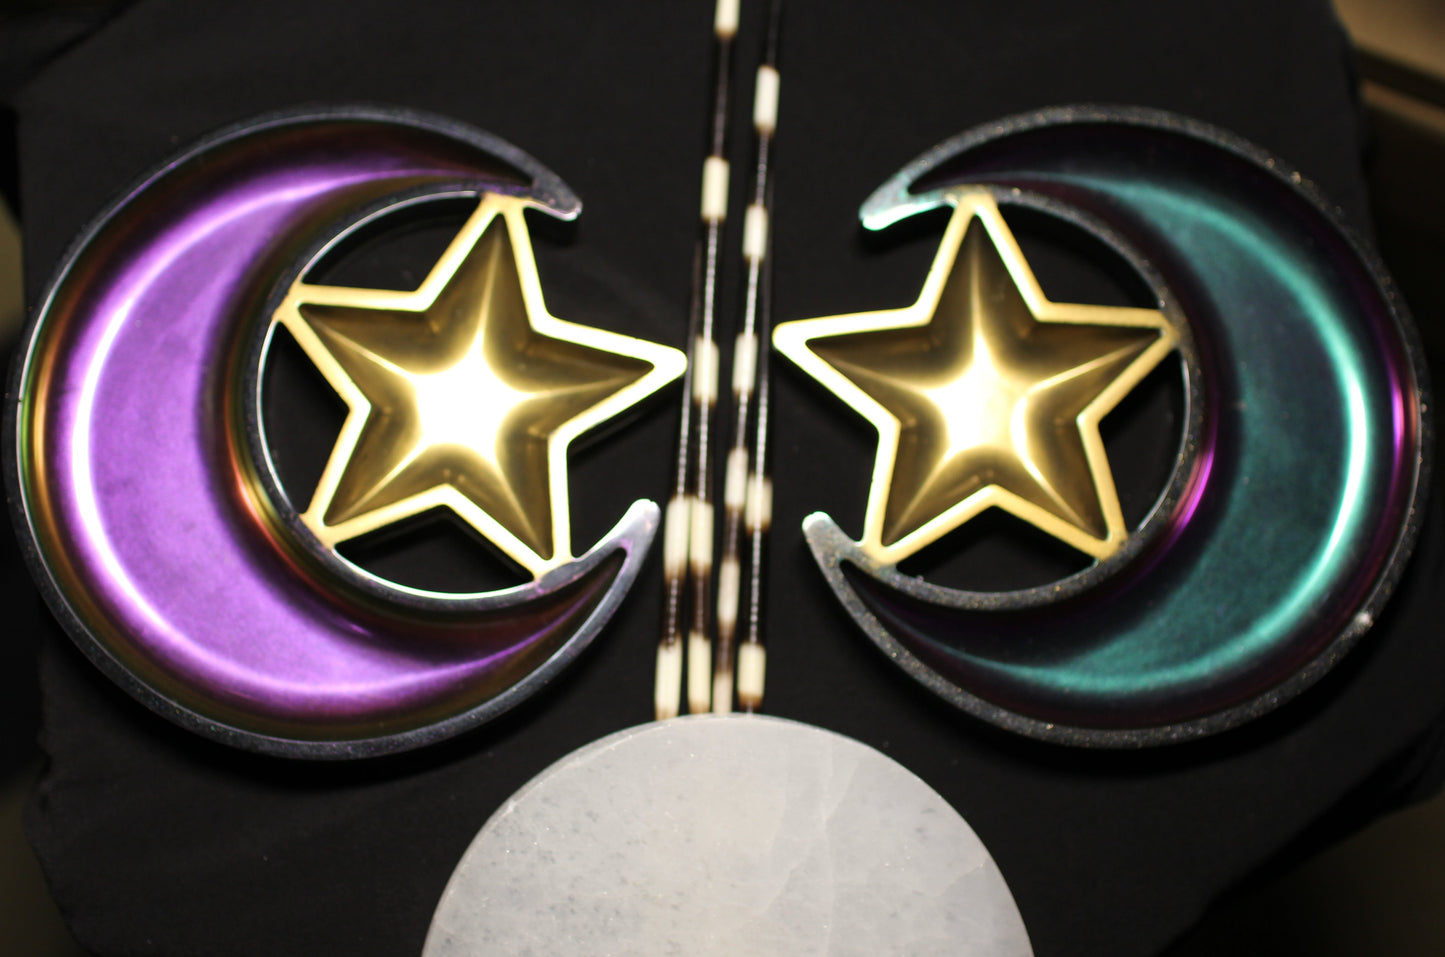 Crescent Moon & Star Charging Plates (6in x 6in)